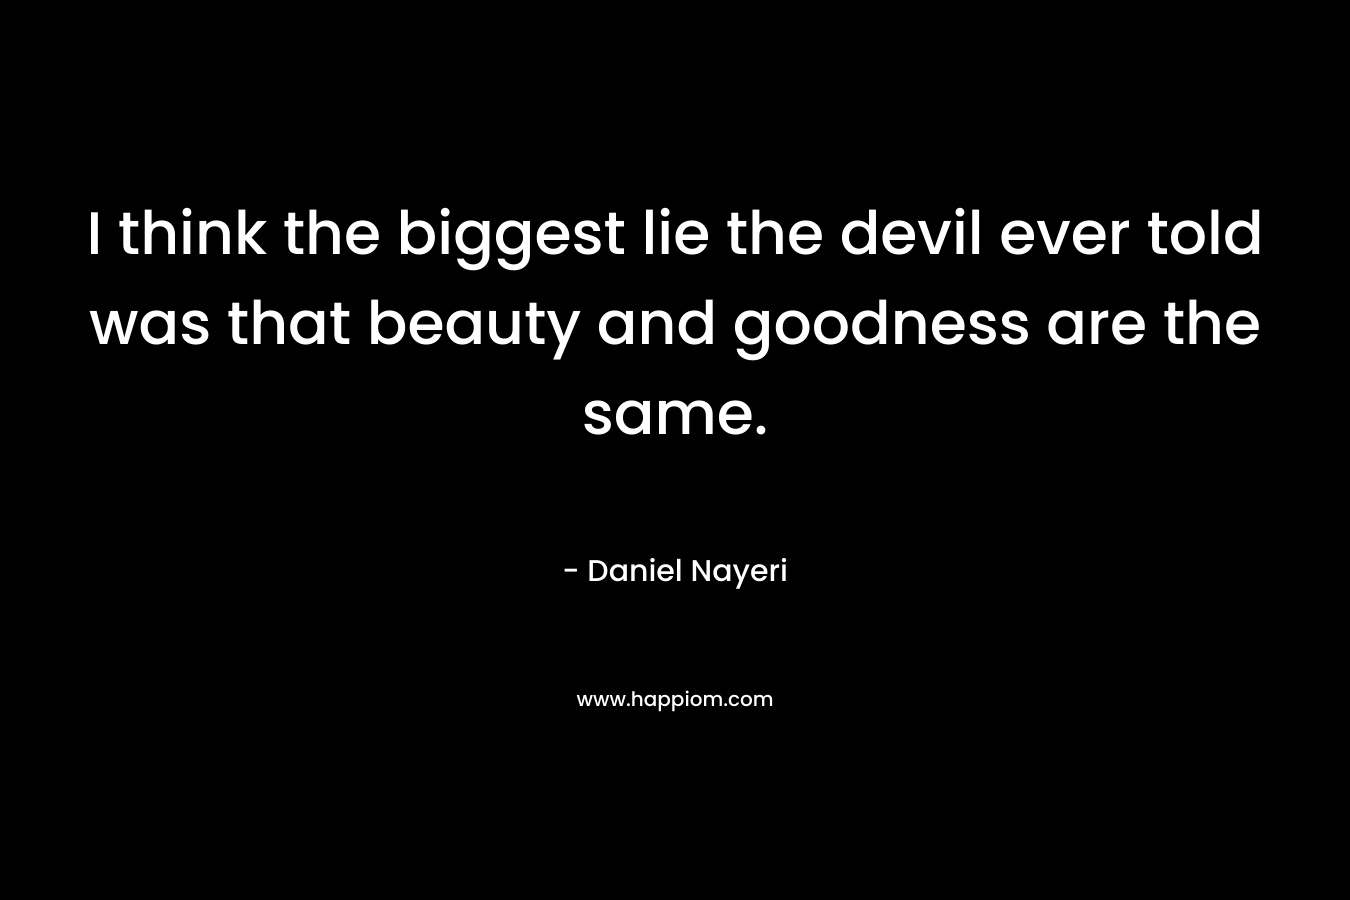 I think the biggest lie the devil ever told was that beauty and goodness are the same. – Daniel Nayeri